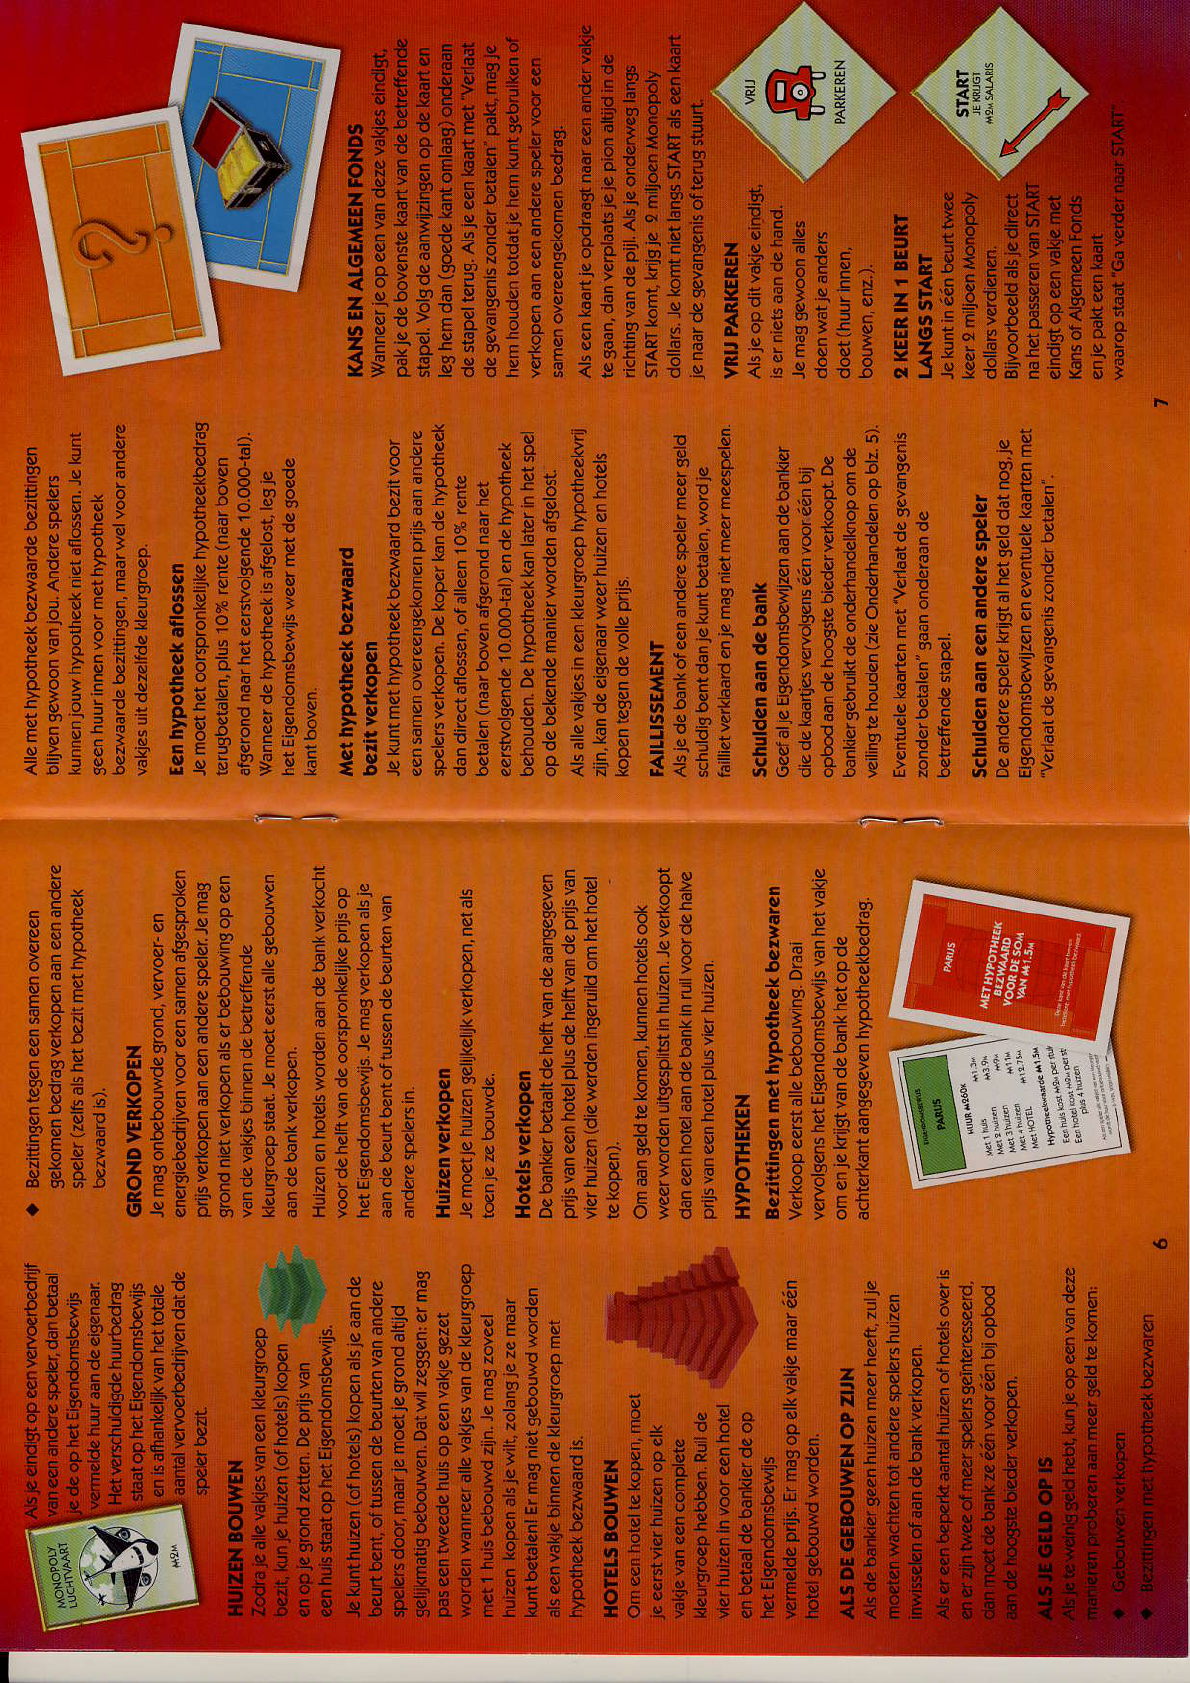 Hasbro Monopoly (page 1 of 6) (Dutch)